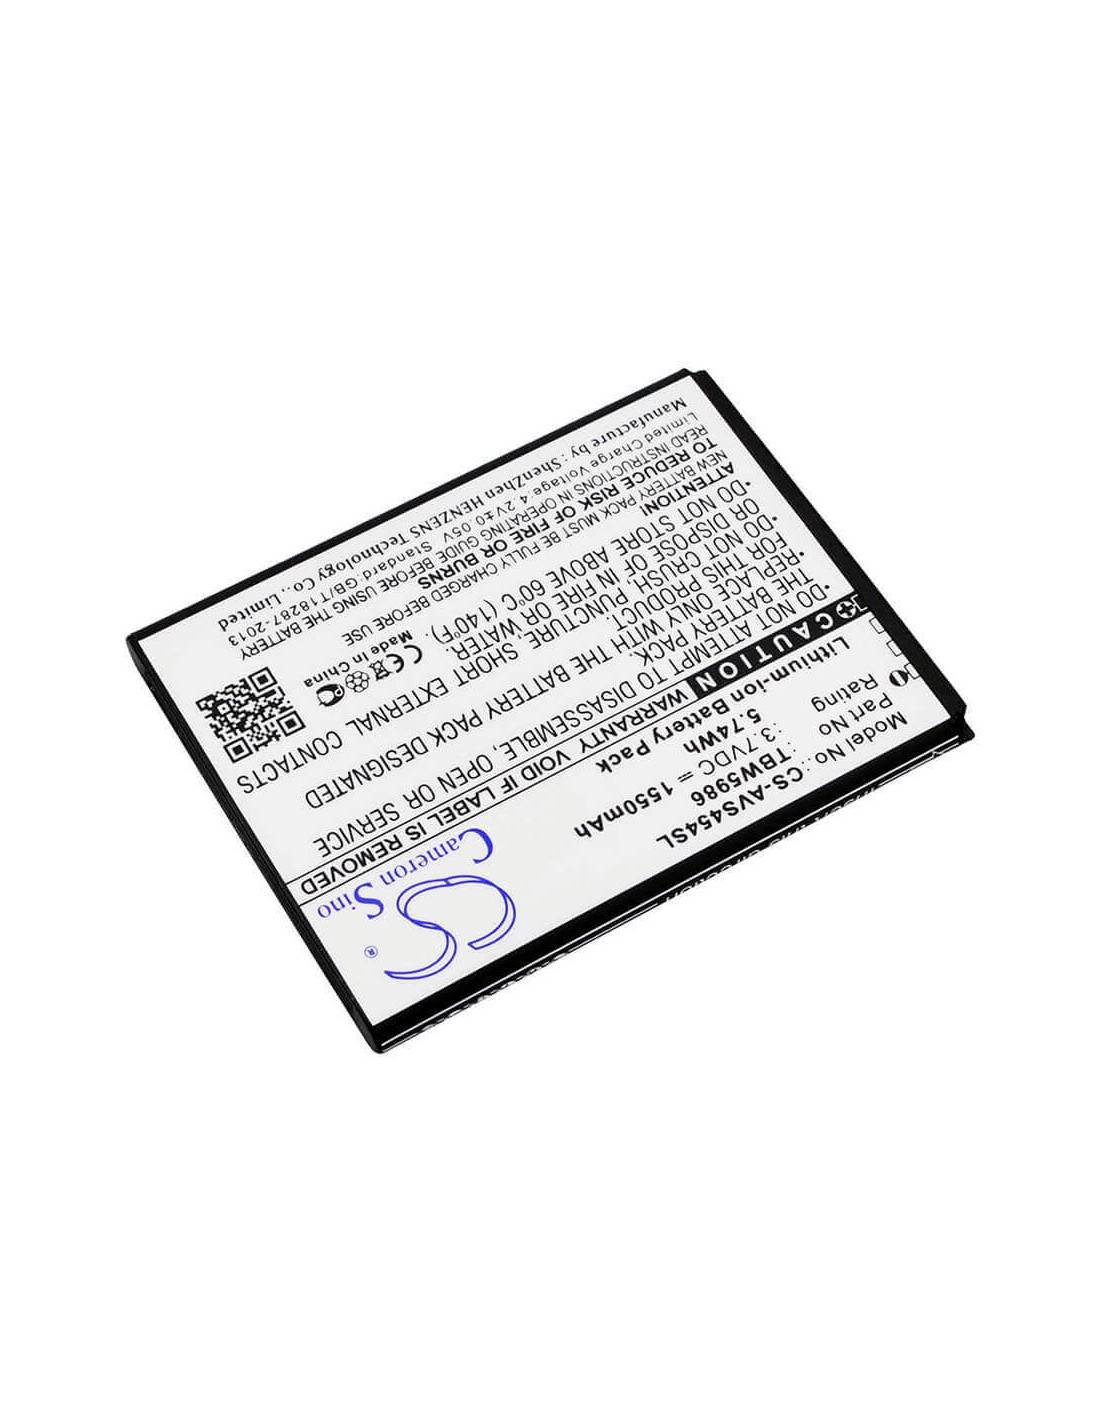 Battery for Archos 45 Helium 4G, 45b Helium 4g, 45 Neon 3.7V, 1550mAh - 5.74Wh